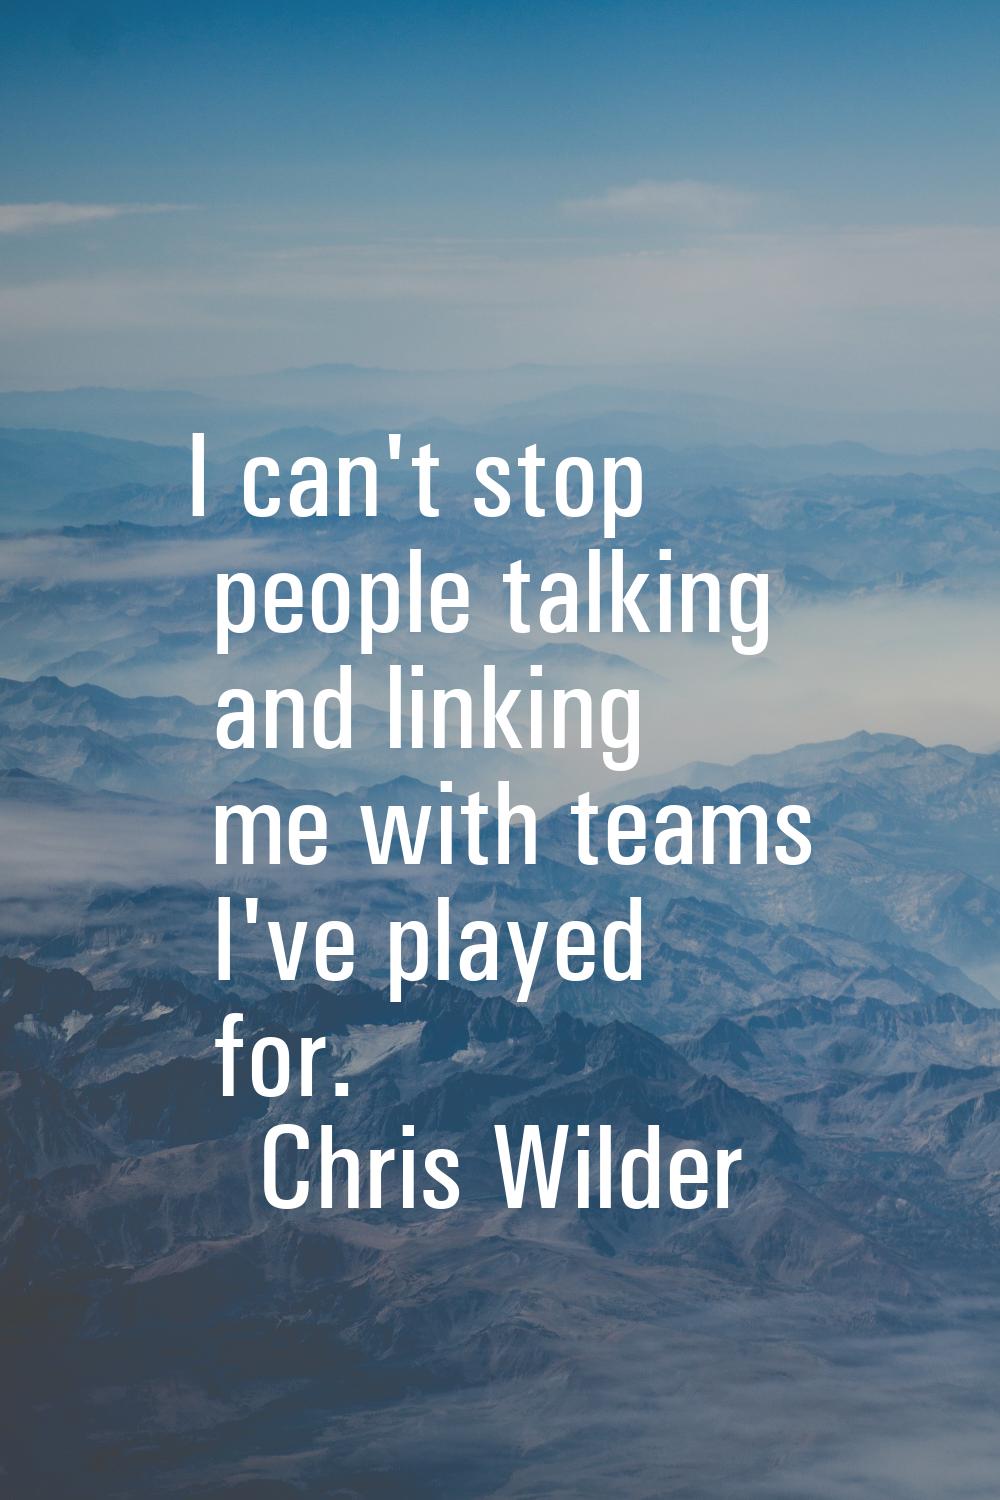 I can't stop people talking and linking me with teams I've played for.